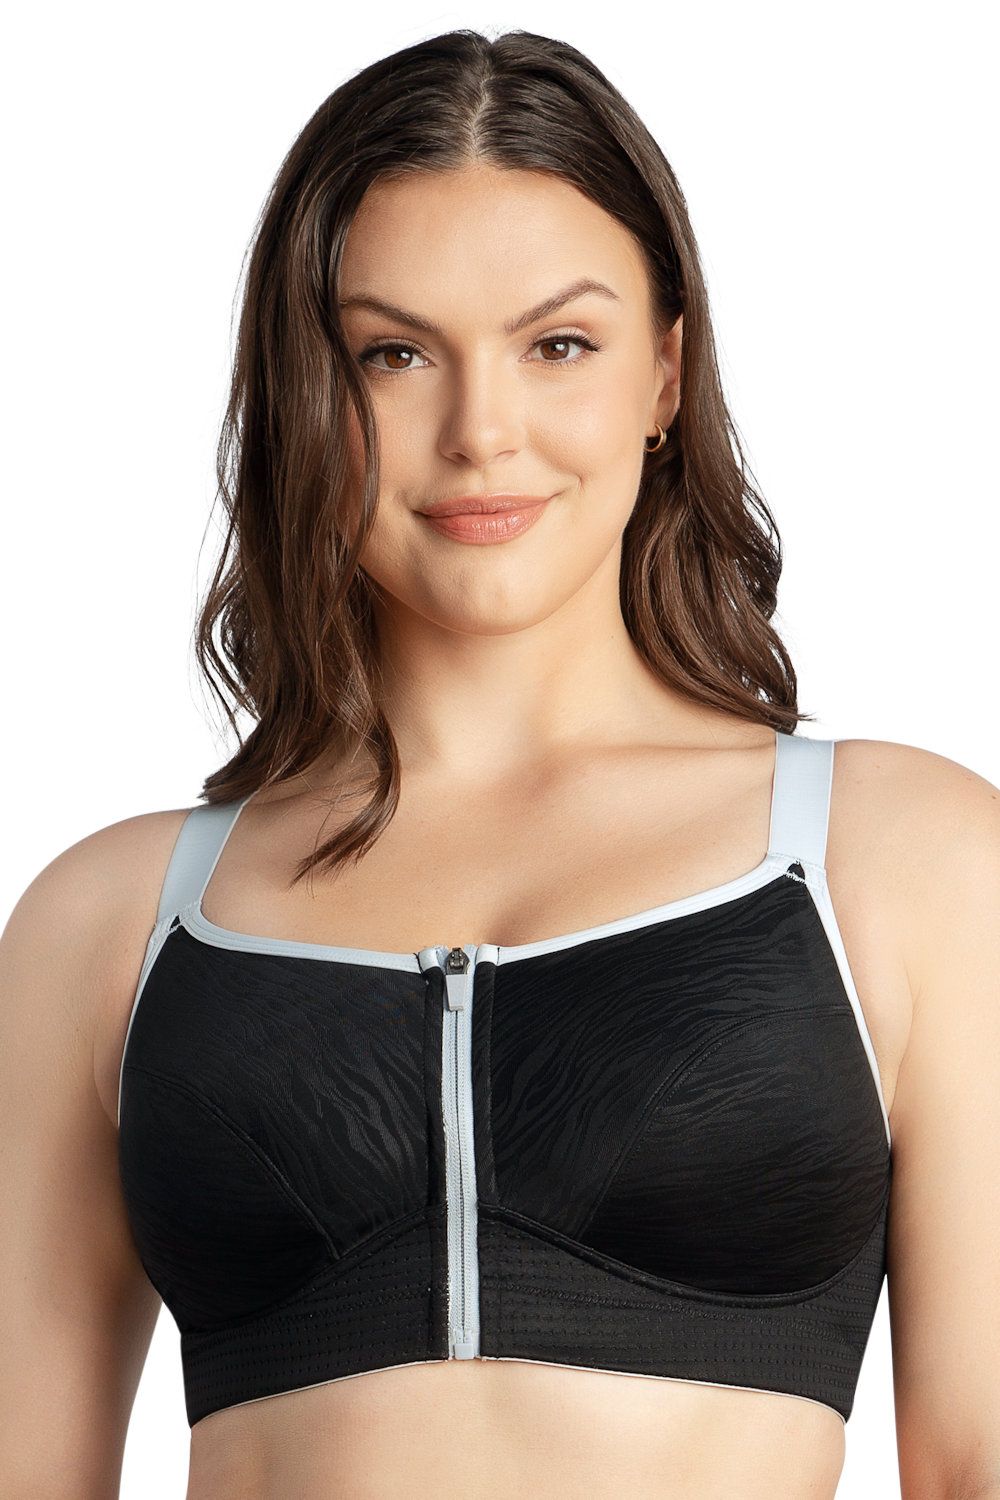 Our sports bras come in 70 sizes